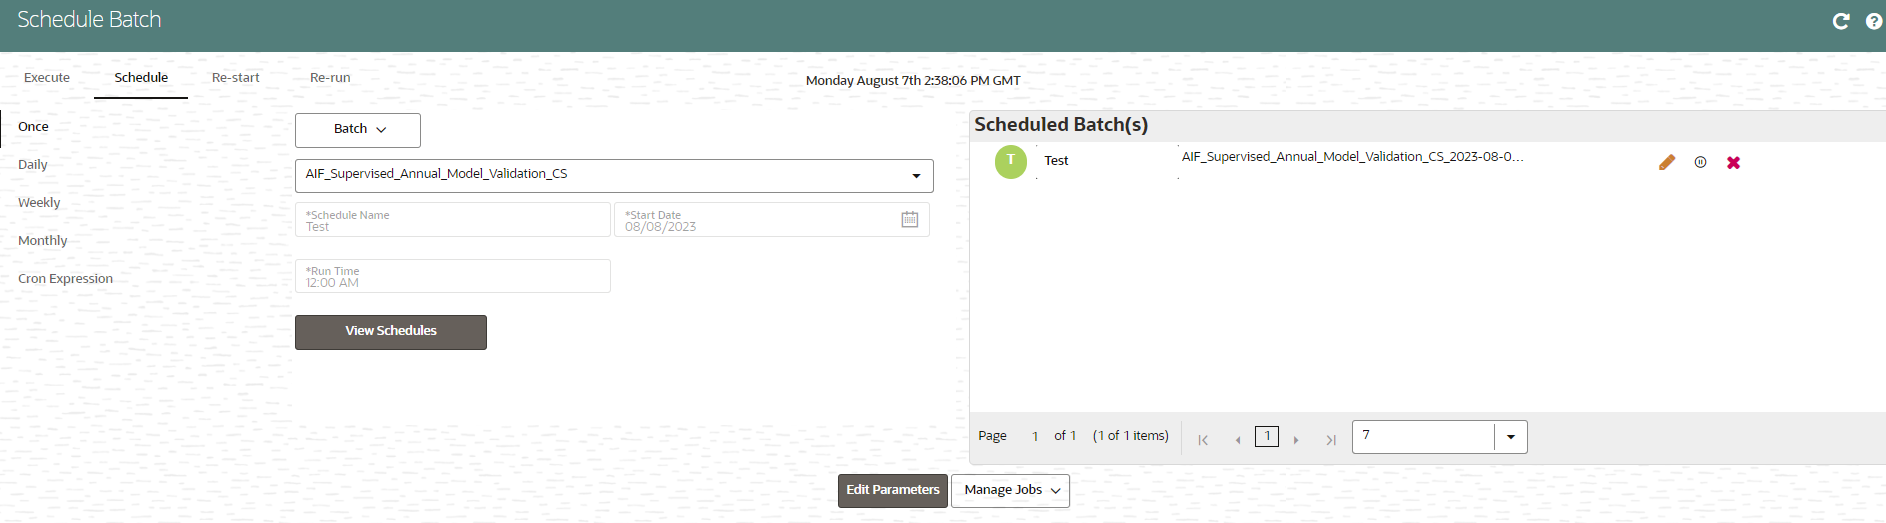 This image displays the Scheduled Batches.